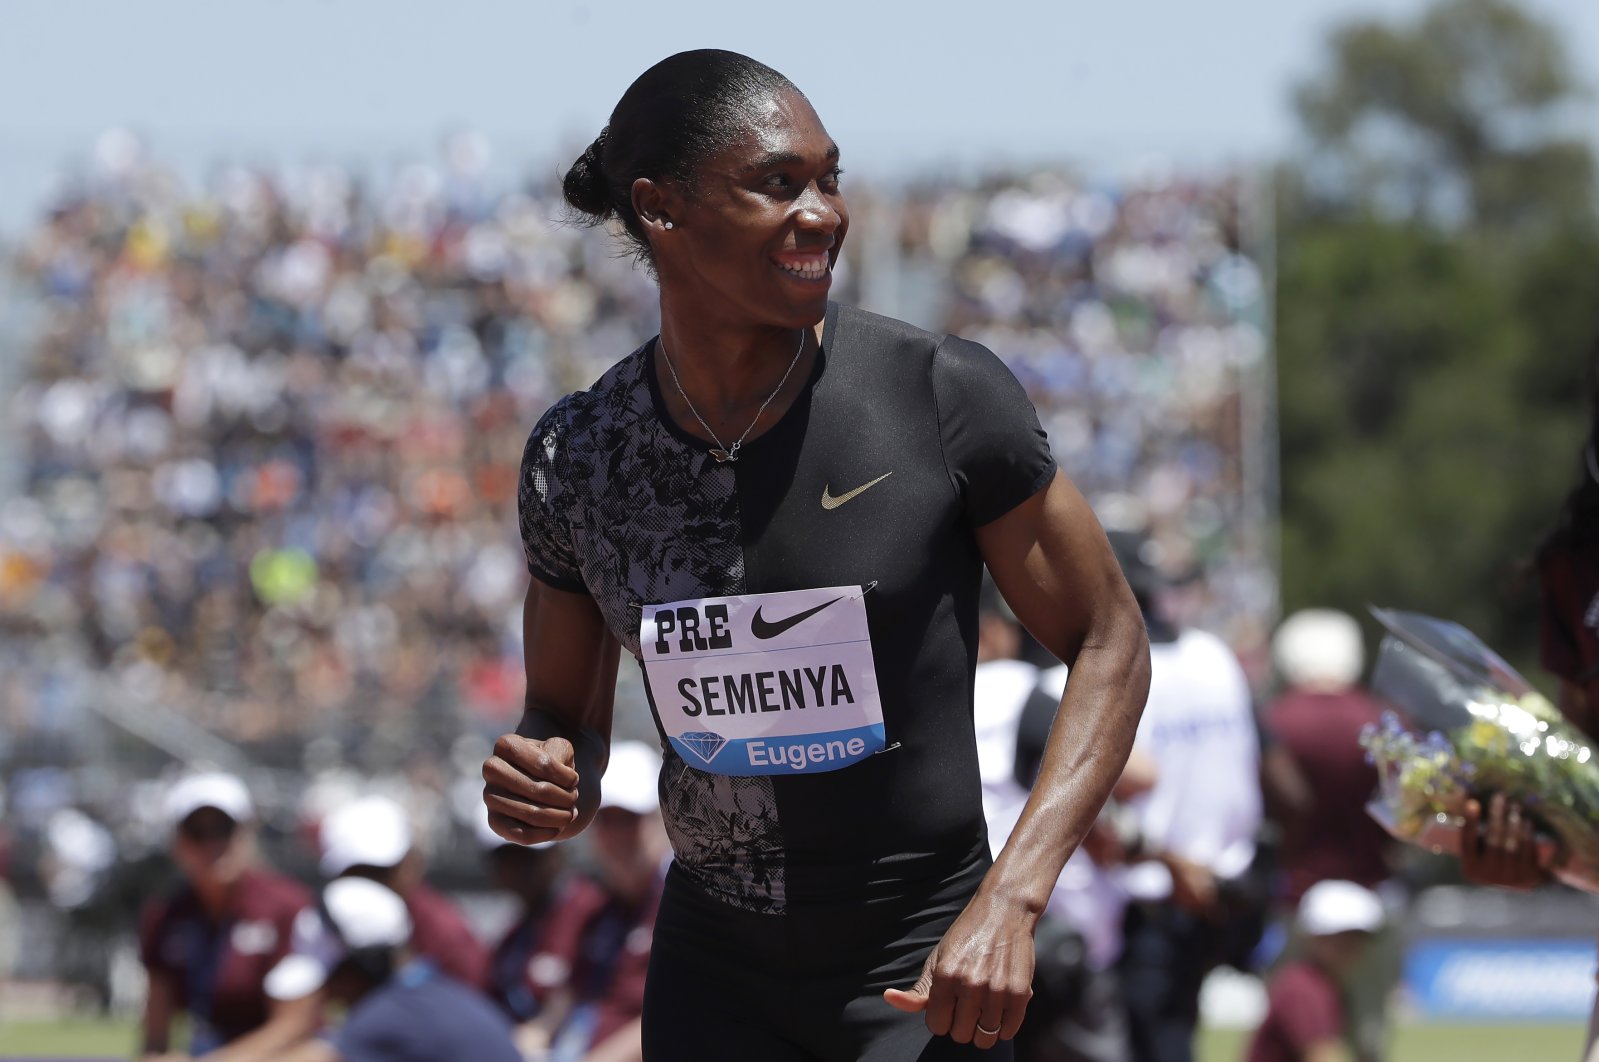 South Africa's Caster Semenya smiles after winning the women's 800-meter race during the Prefontaine Classic, an IAAF Diamond League athletics meeting, in Stanford, California, U.S., June 30, 2019. (AP Photo)